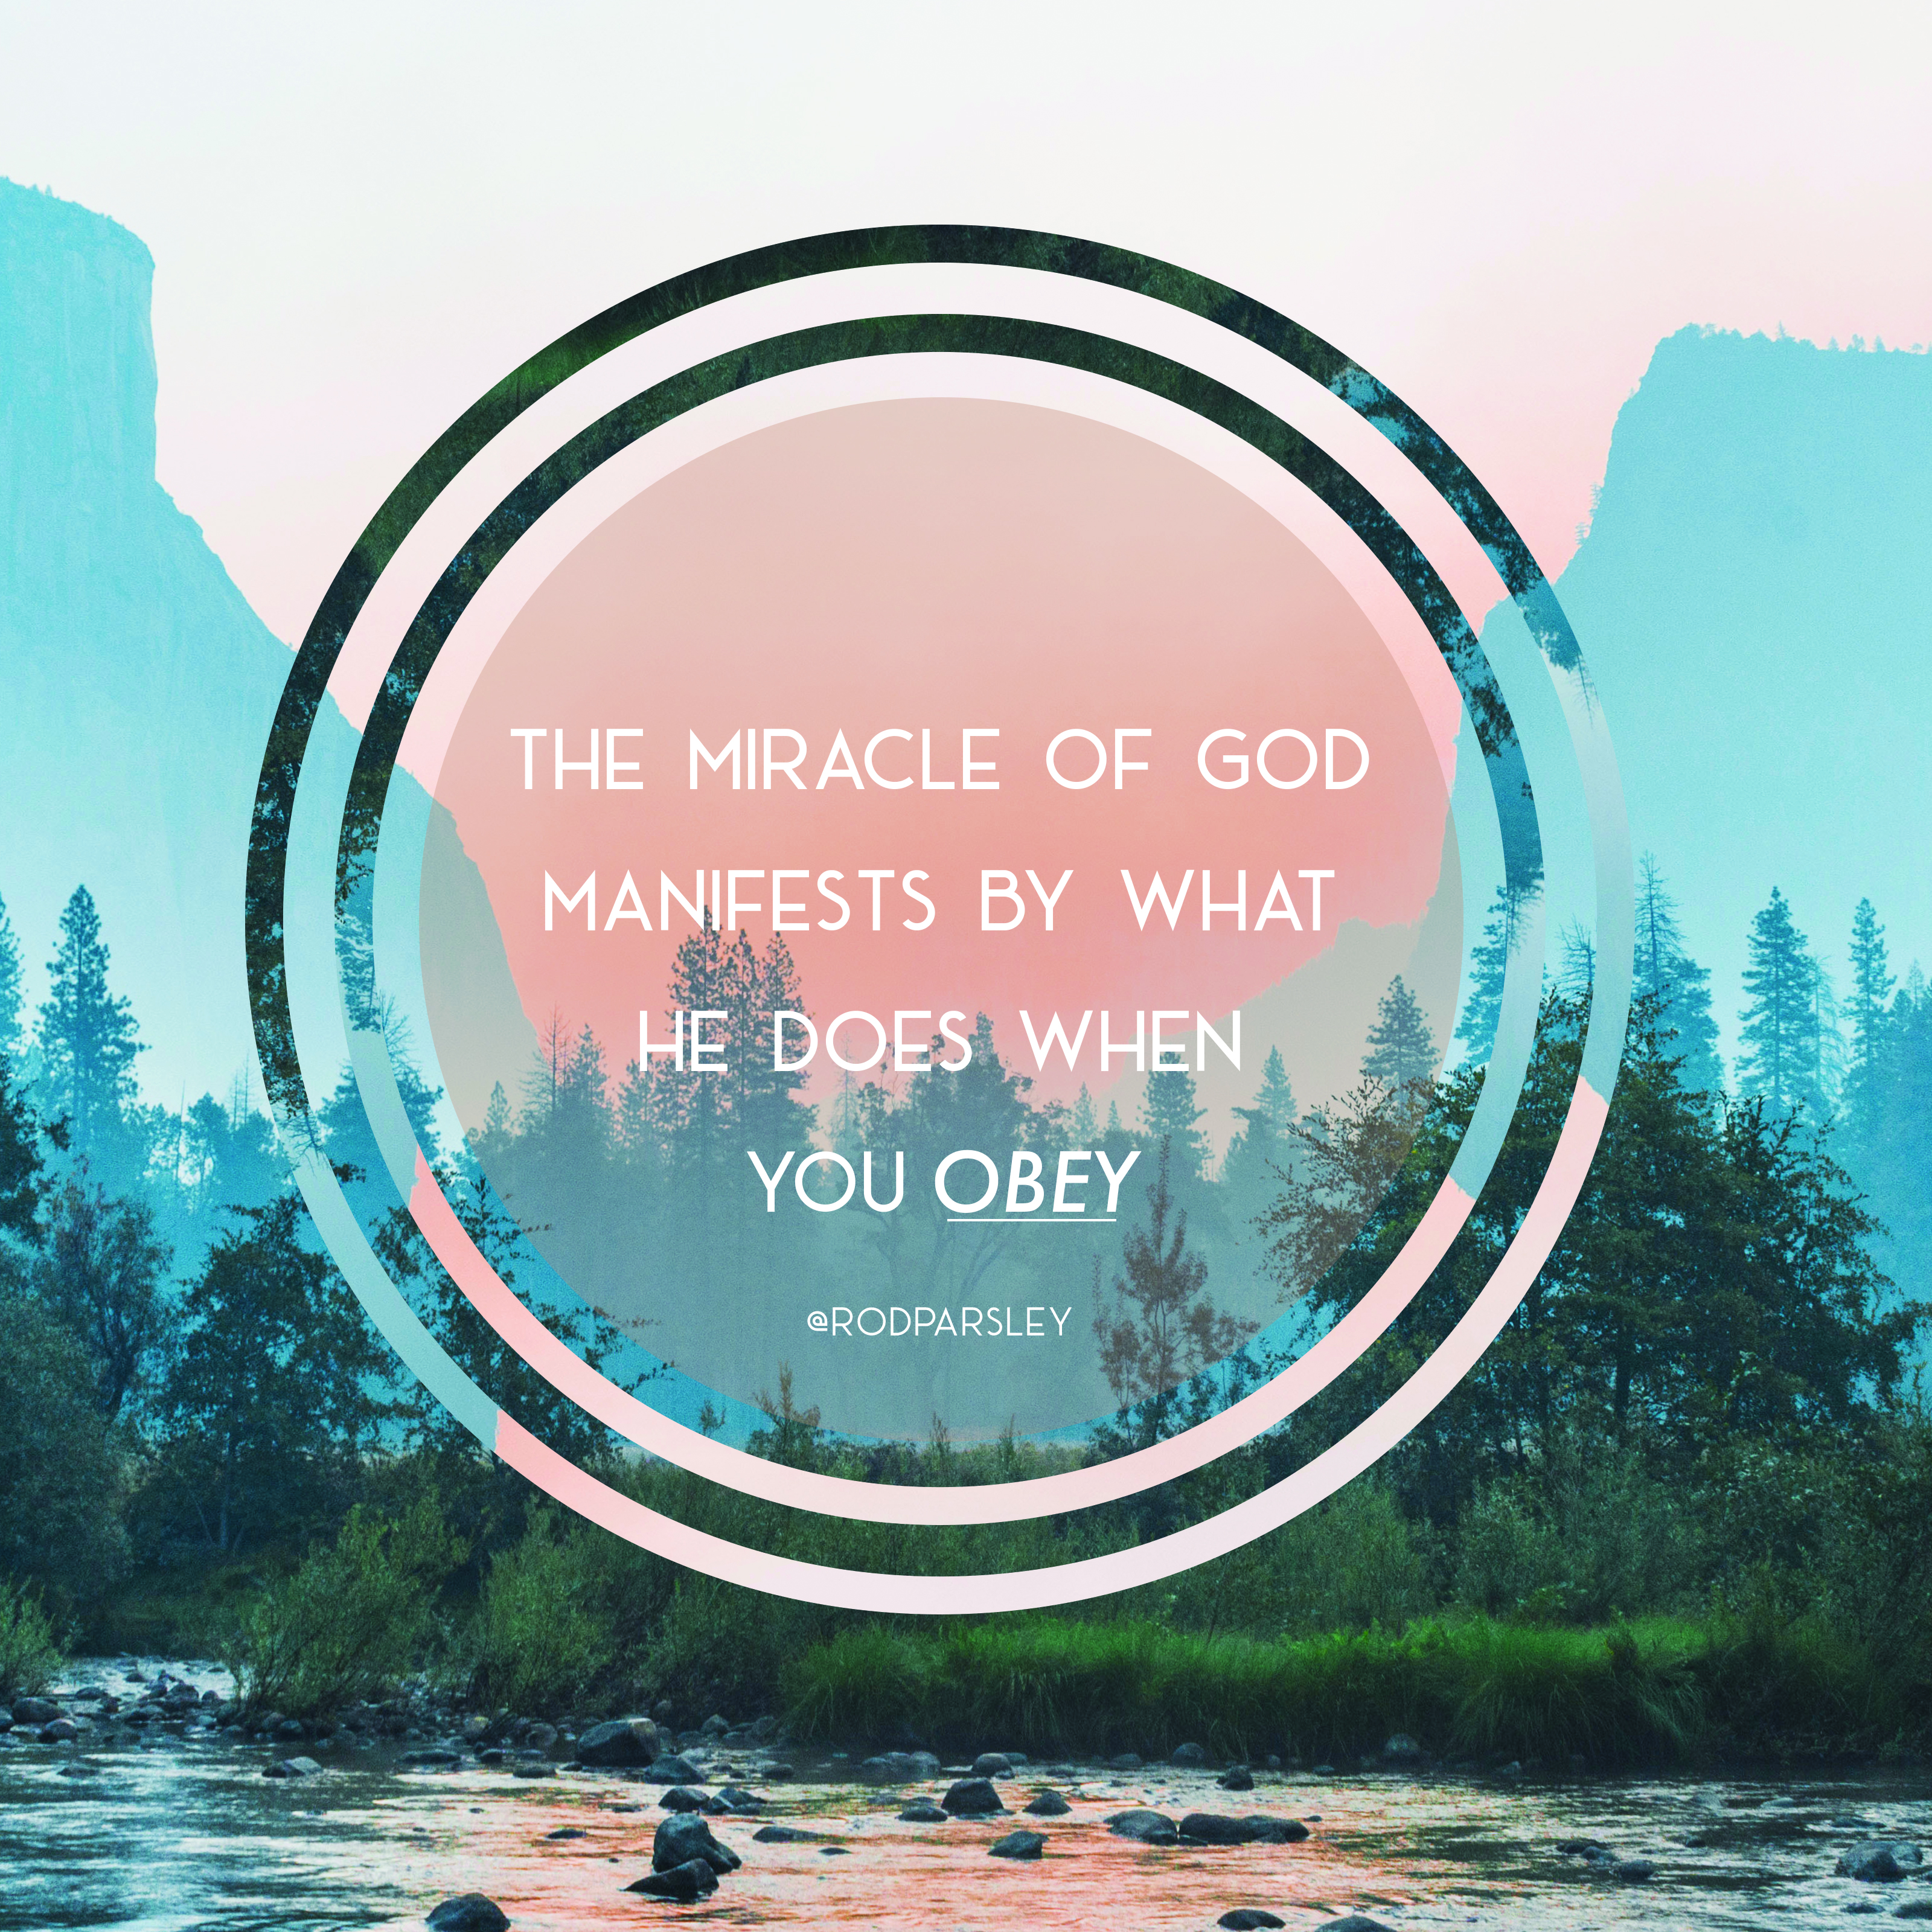 “We’The Miracle of God manifests by what He does when you obey” – Pastor Rod Parsley